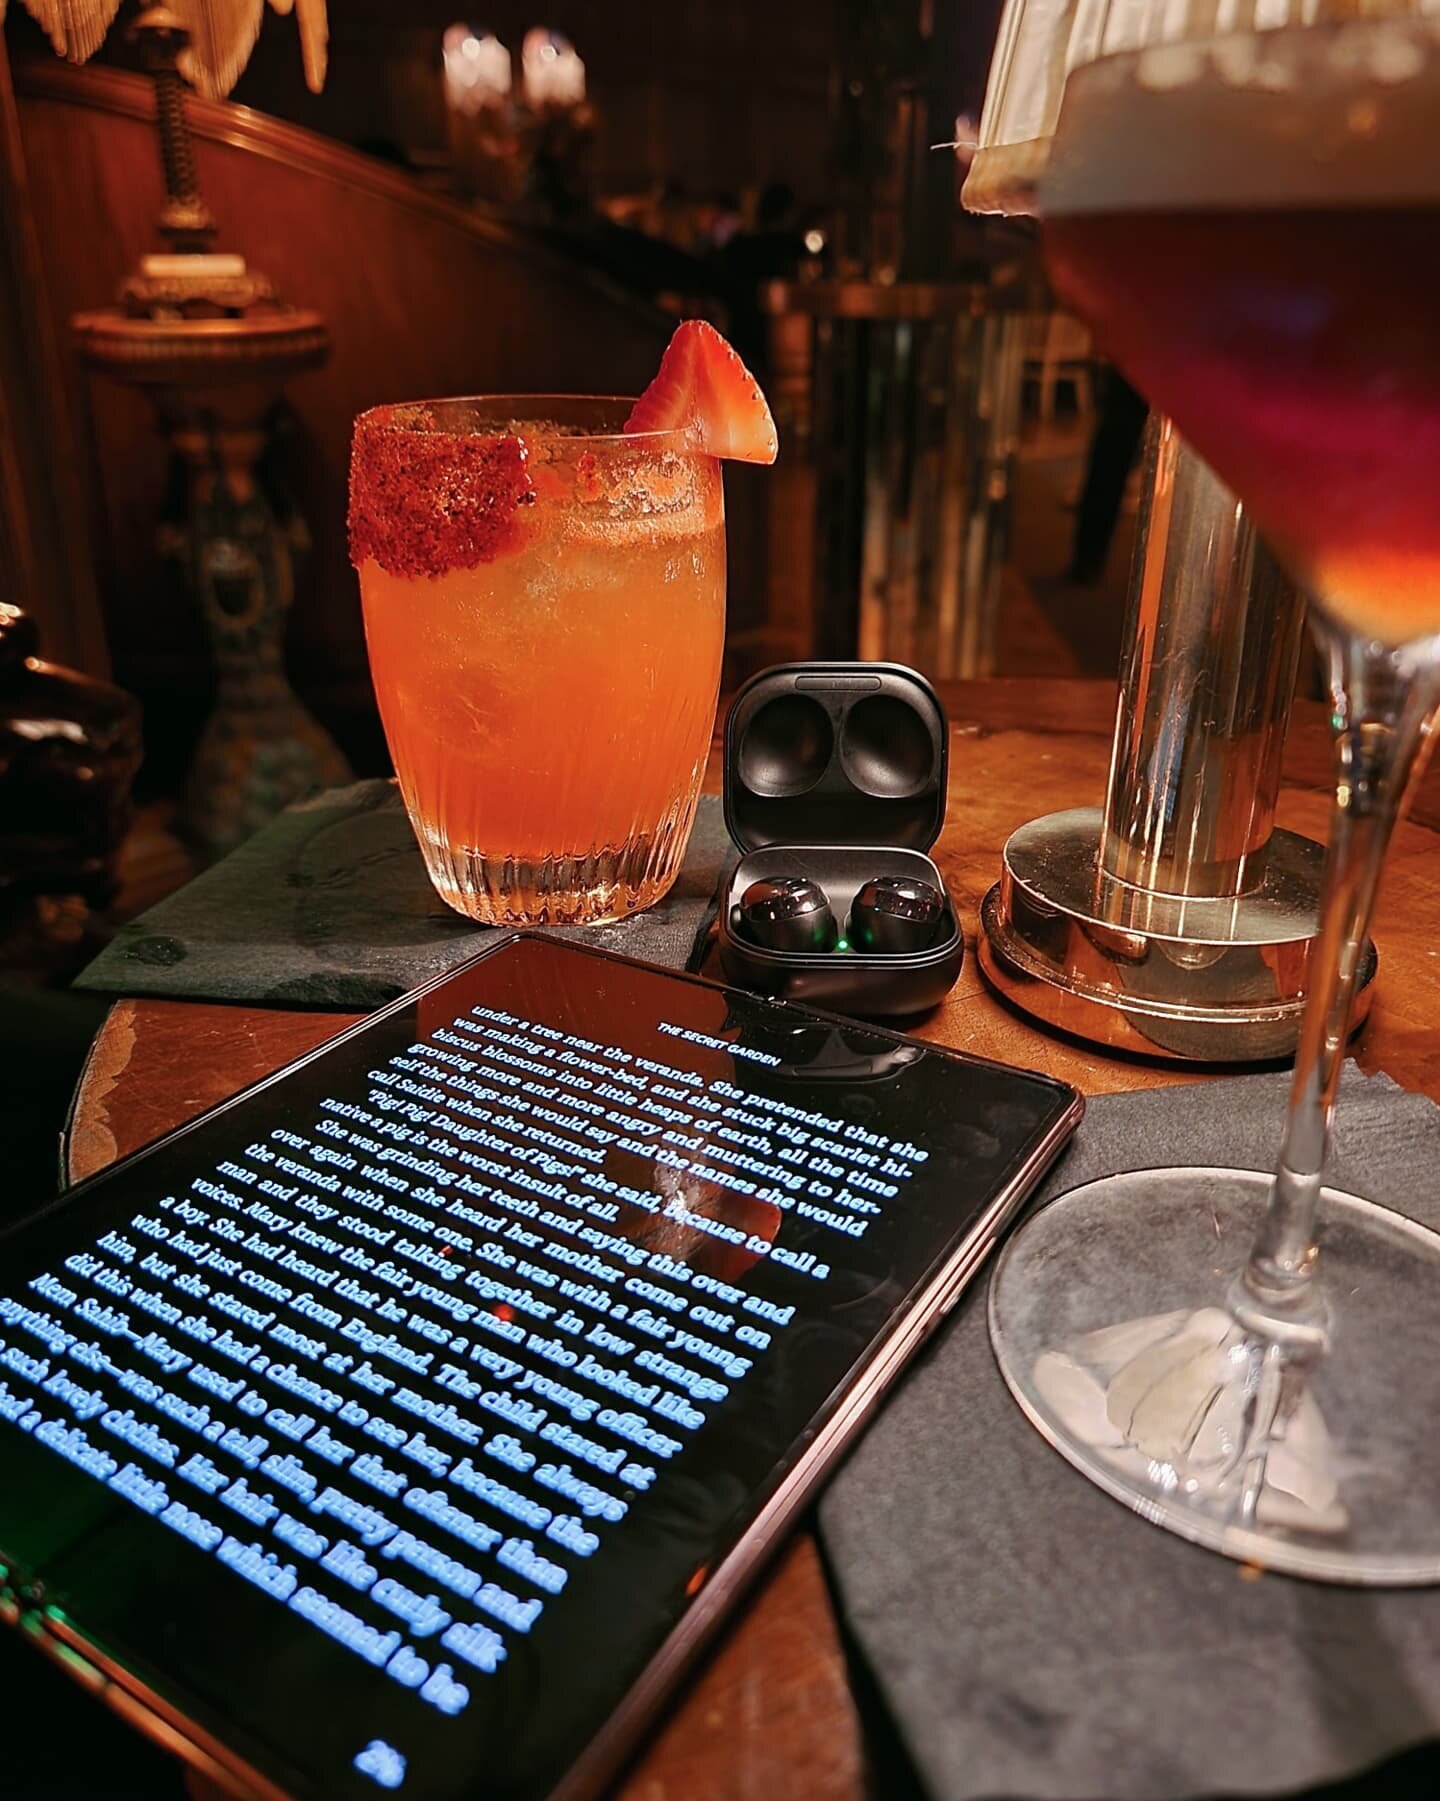 Nothing like enjoying a good book on the @samsungmobileusa #GalaxyZFold2 5G and relaxing music with the #GalaxyBudsPro alongside a couple of delicious drinks. There's something about having more screen real estate that makes me more keen to reading a